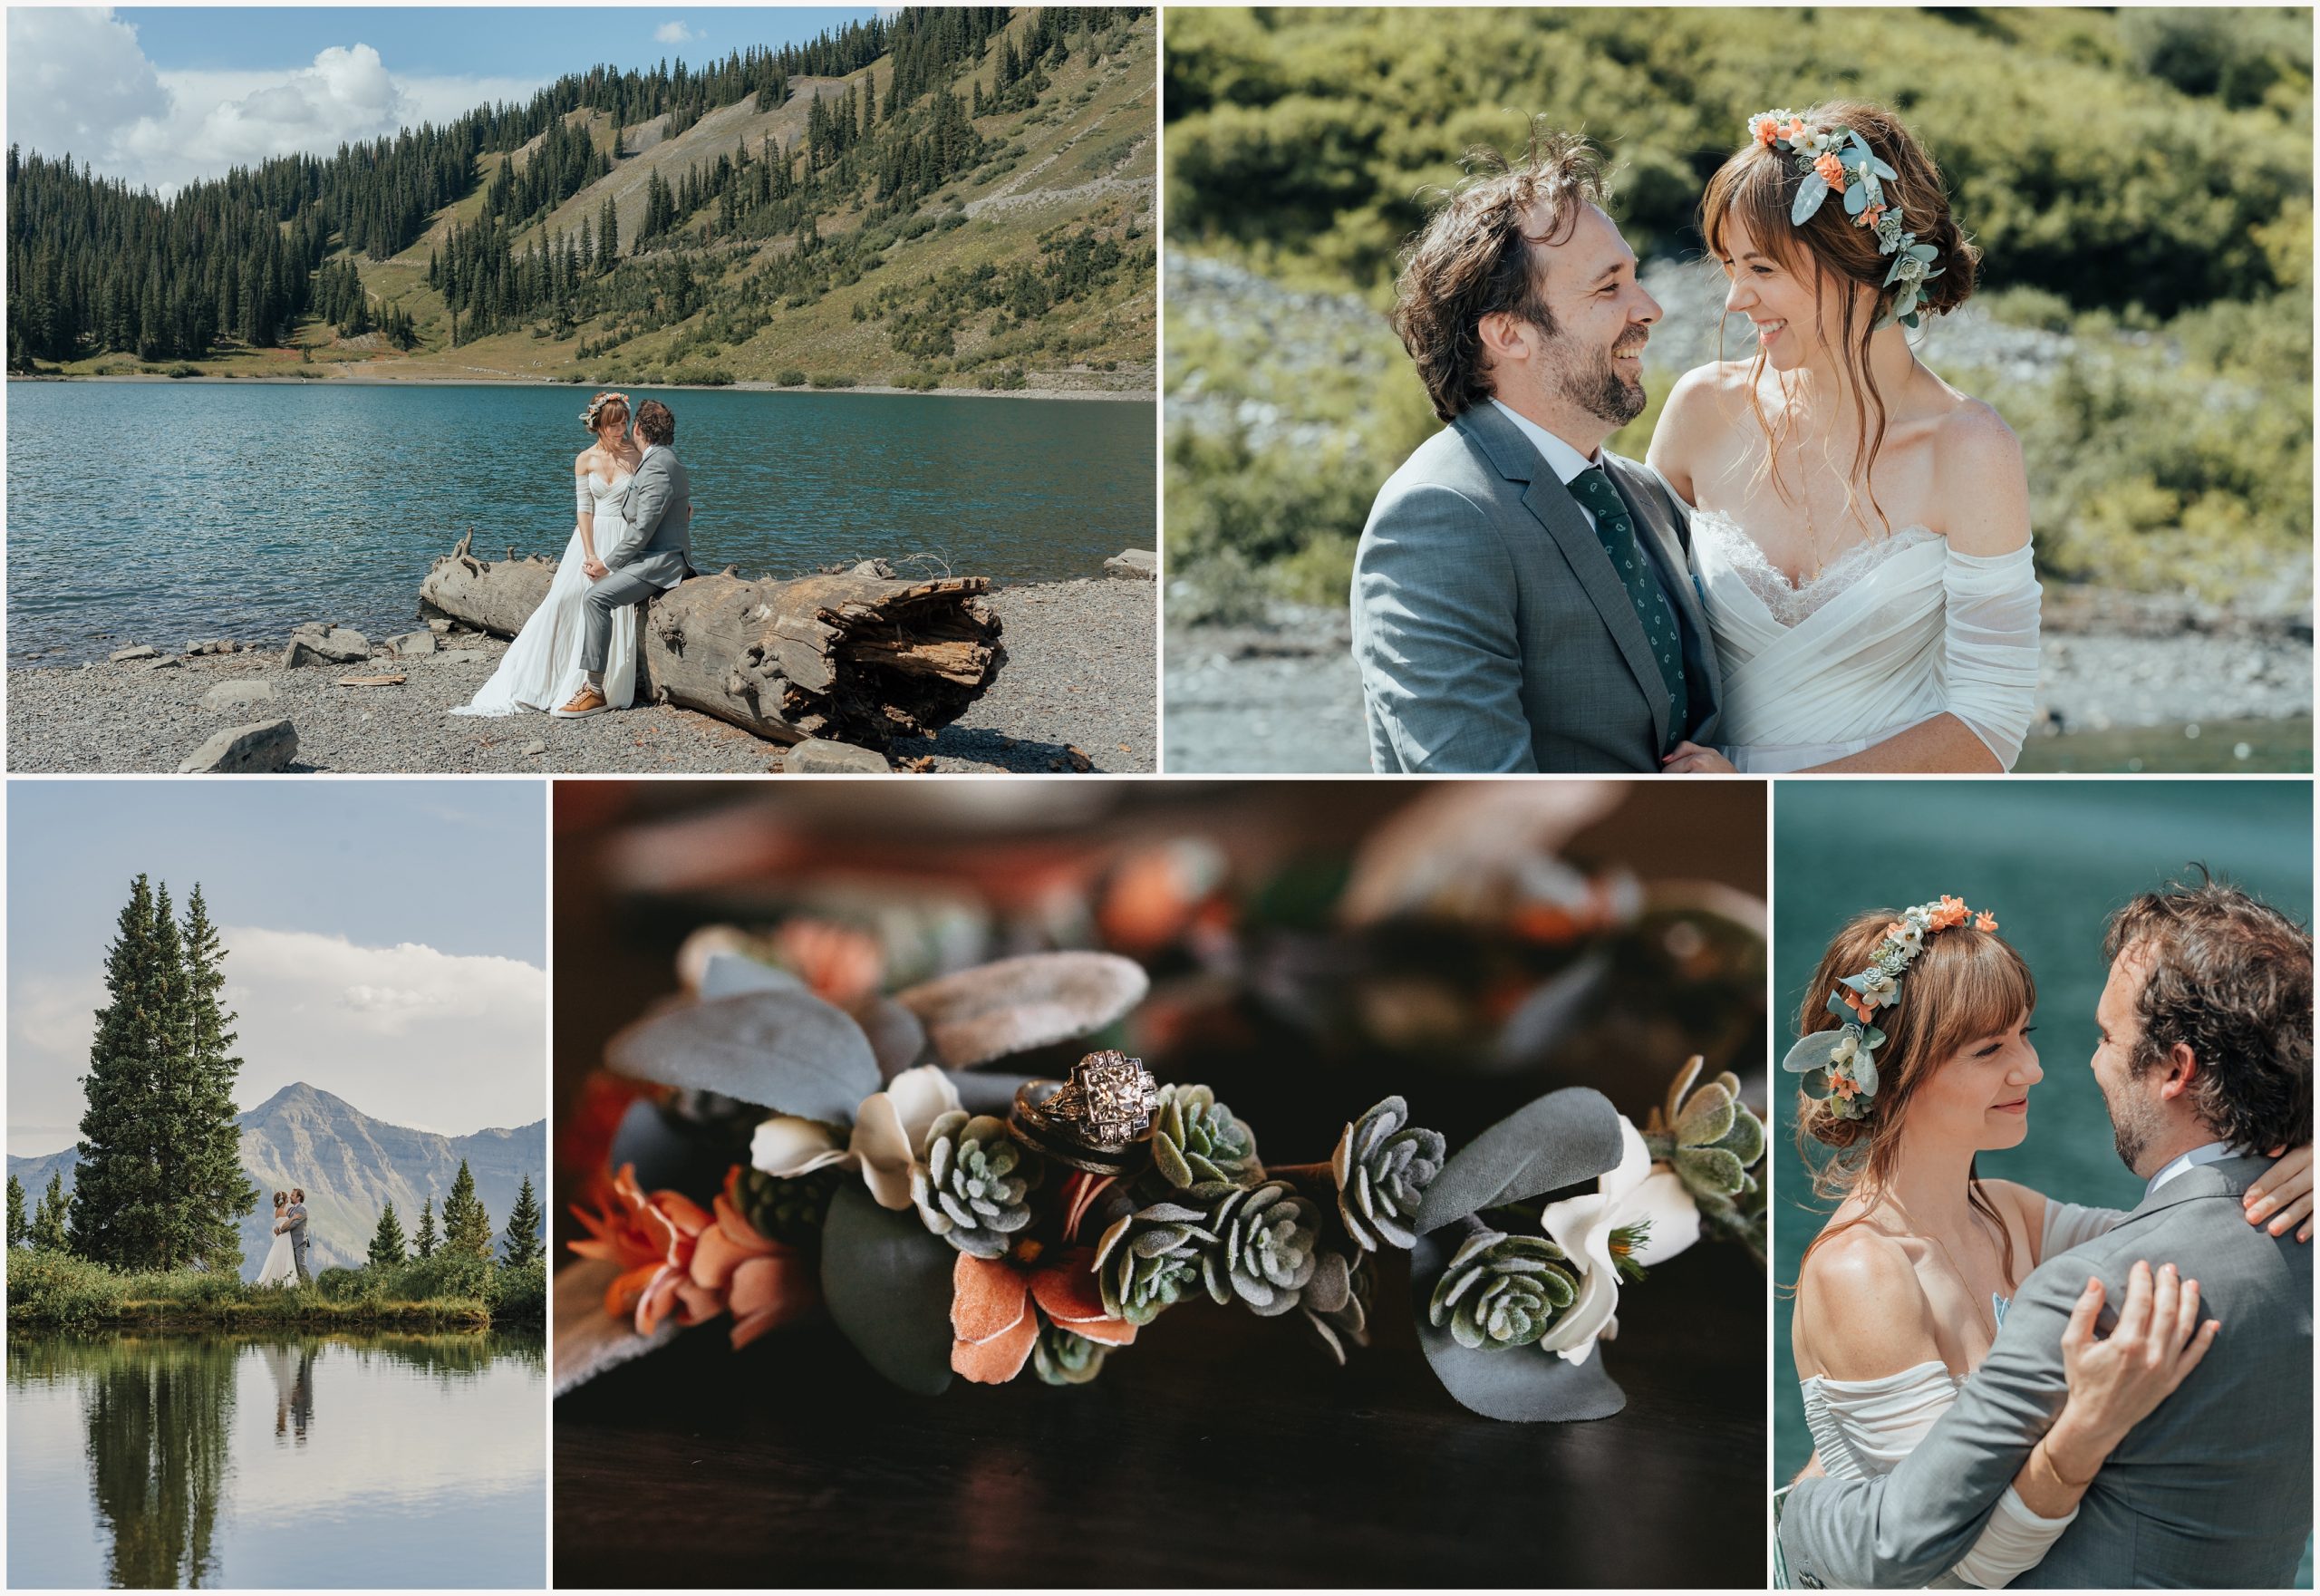 When to elope in Colorado, Best Month to Have an Outdoor Wedding in Colorado, Colorado Elopement Inspiration, Winter Colorado Elopement, Spring Colorado Elopement, Summer Colorado Elopement, Fall Colorado Elopement, best month to elope in Colorado, the best time to elope in Colorado, spring elopement